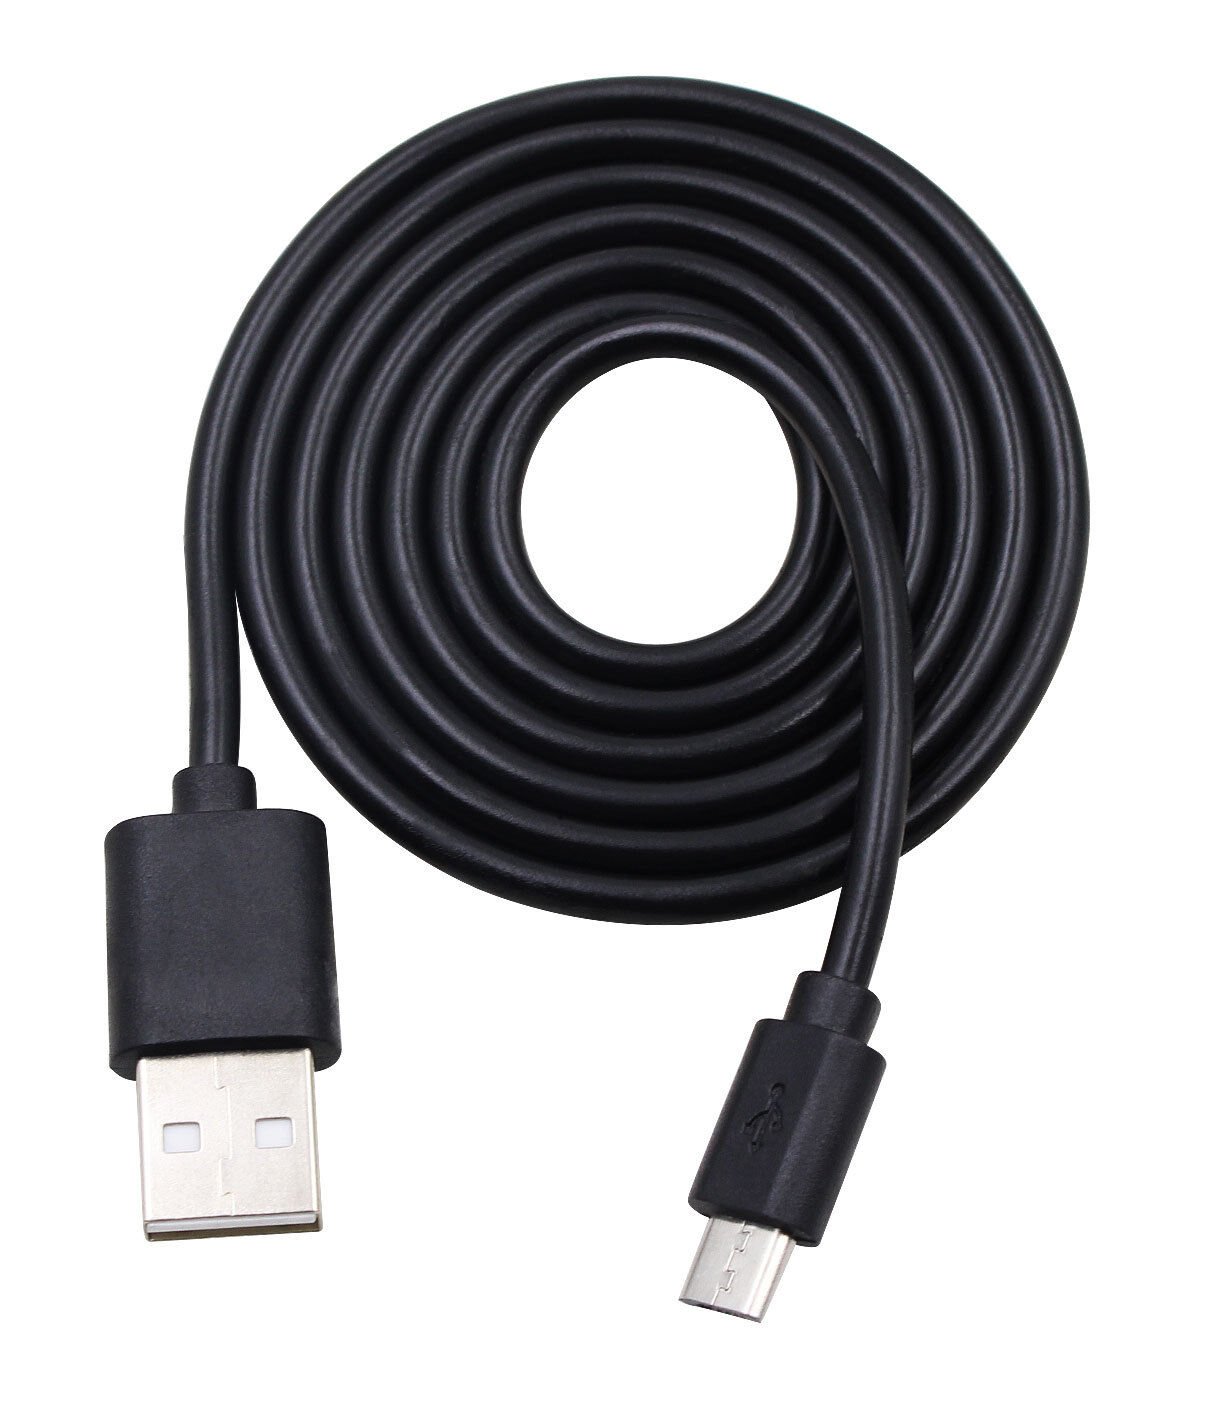 USB Adapter Charger Data Cable Cord For Kobo Aura One Waterproof eReader 2016